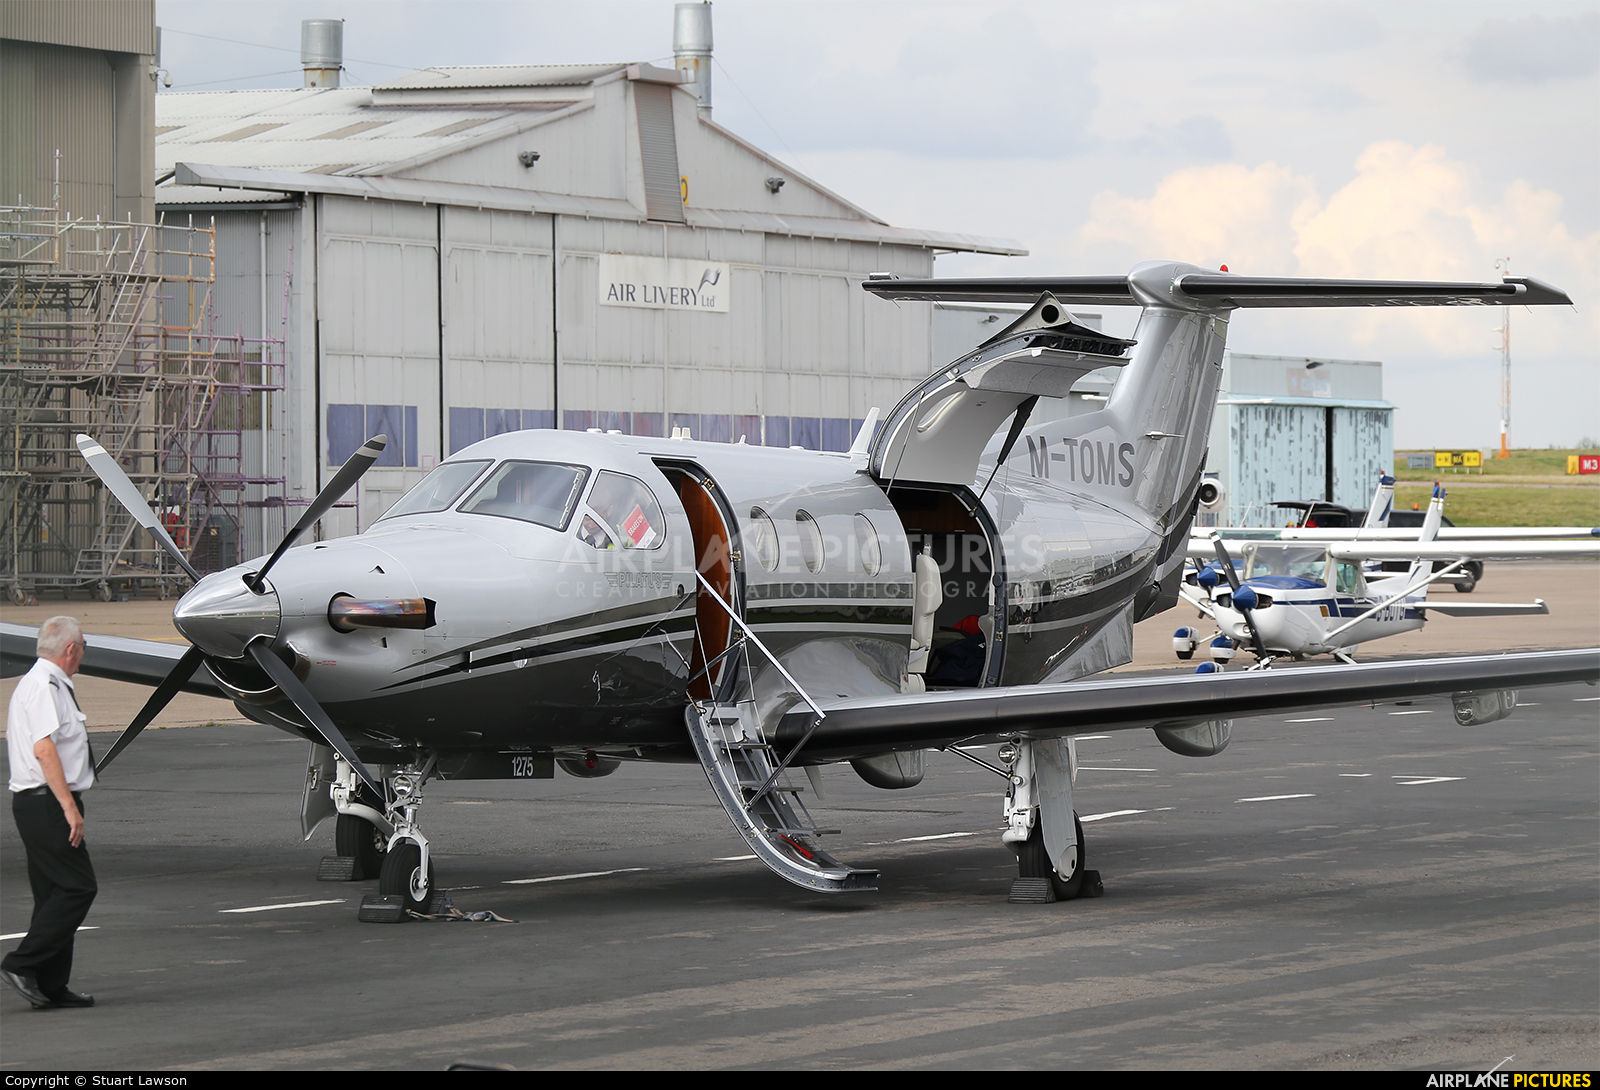 Private M-TOMS aircraft at East Midlands